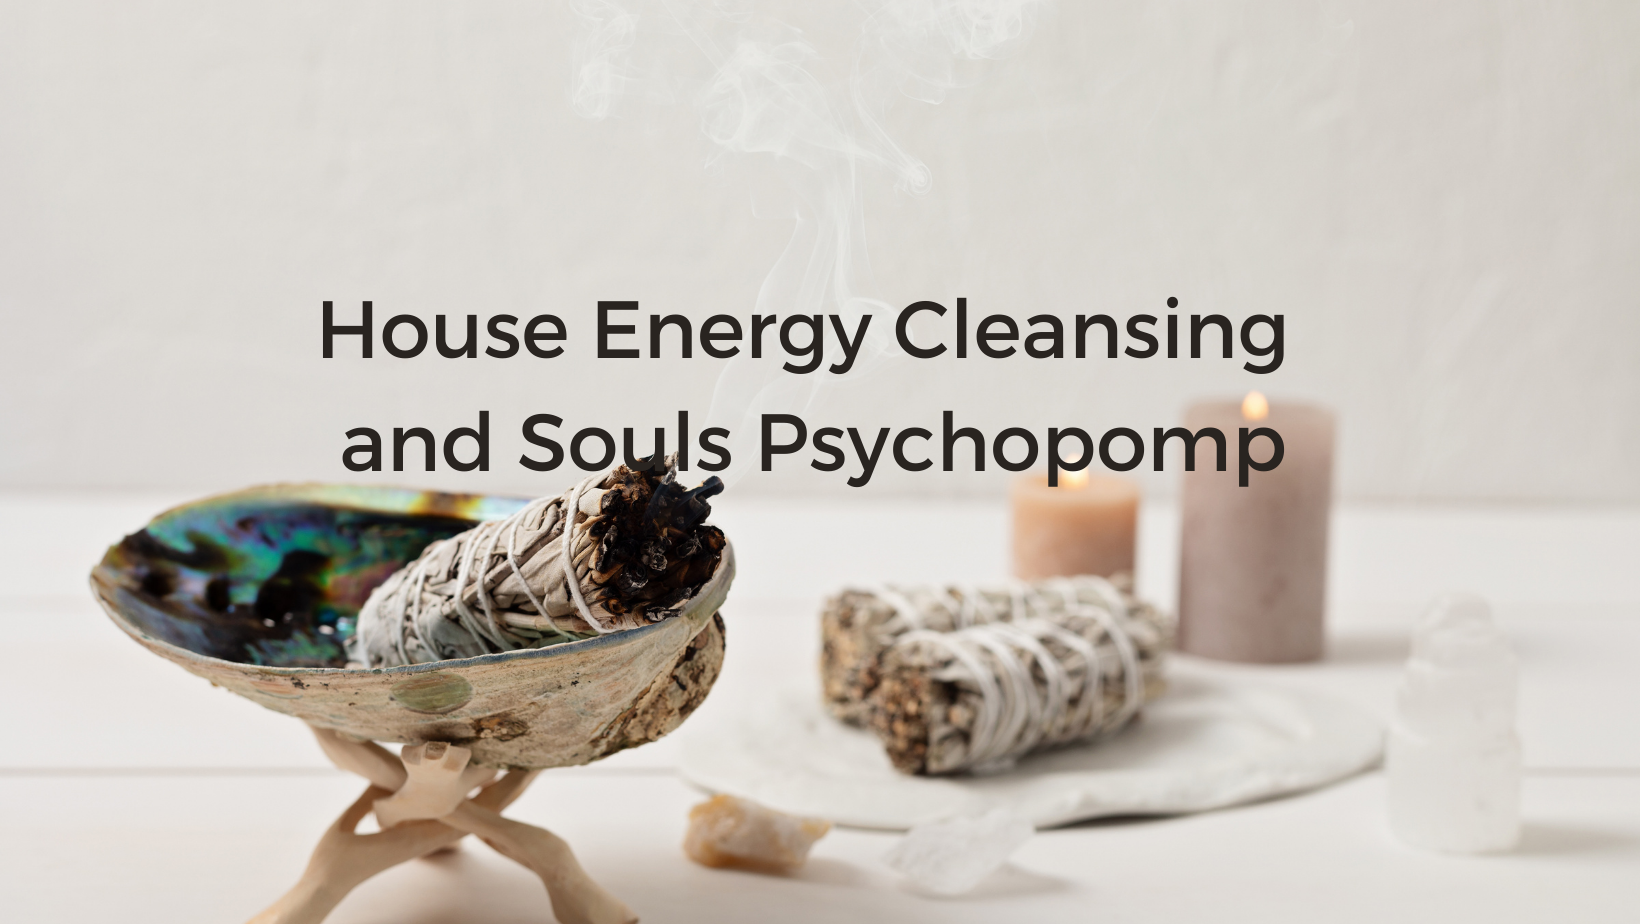 House Energy cleansing and souls psychopomp